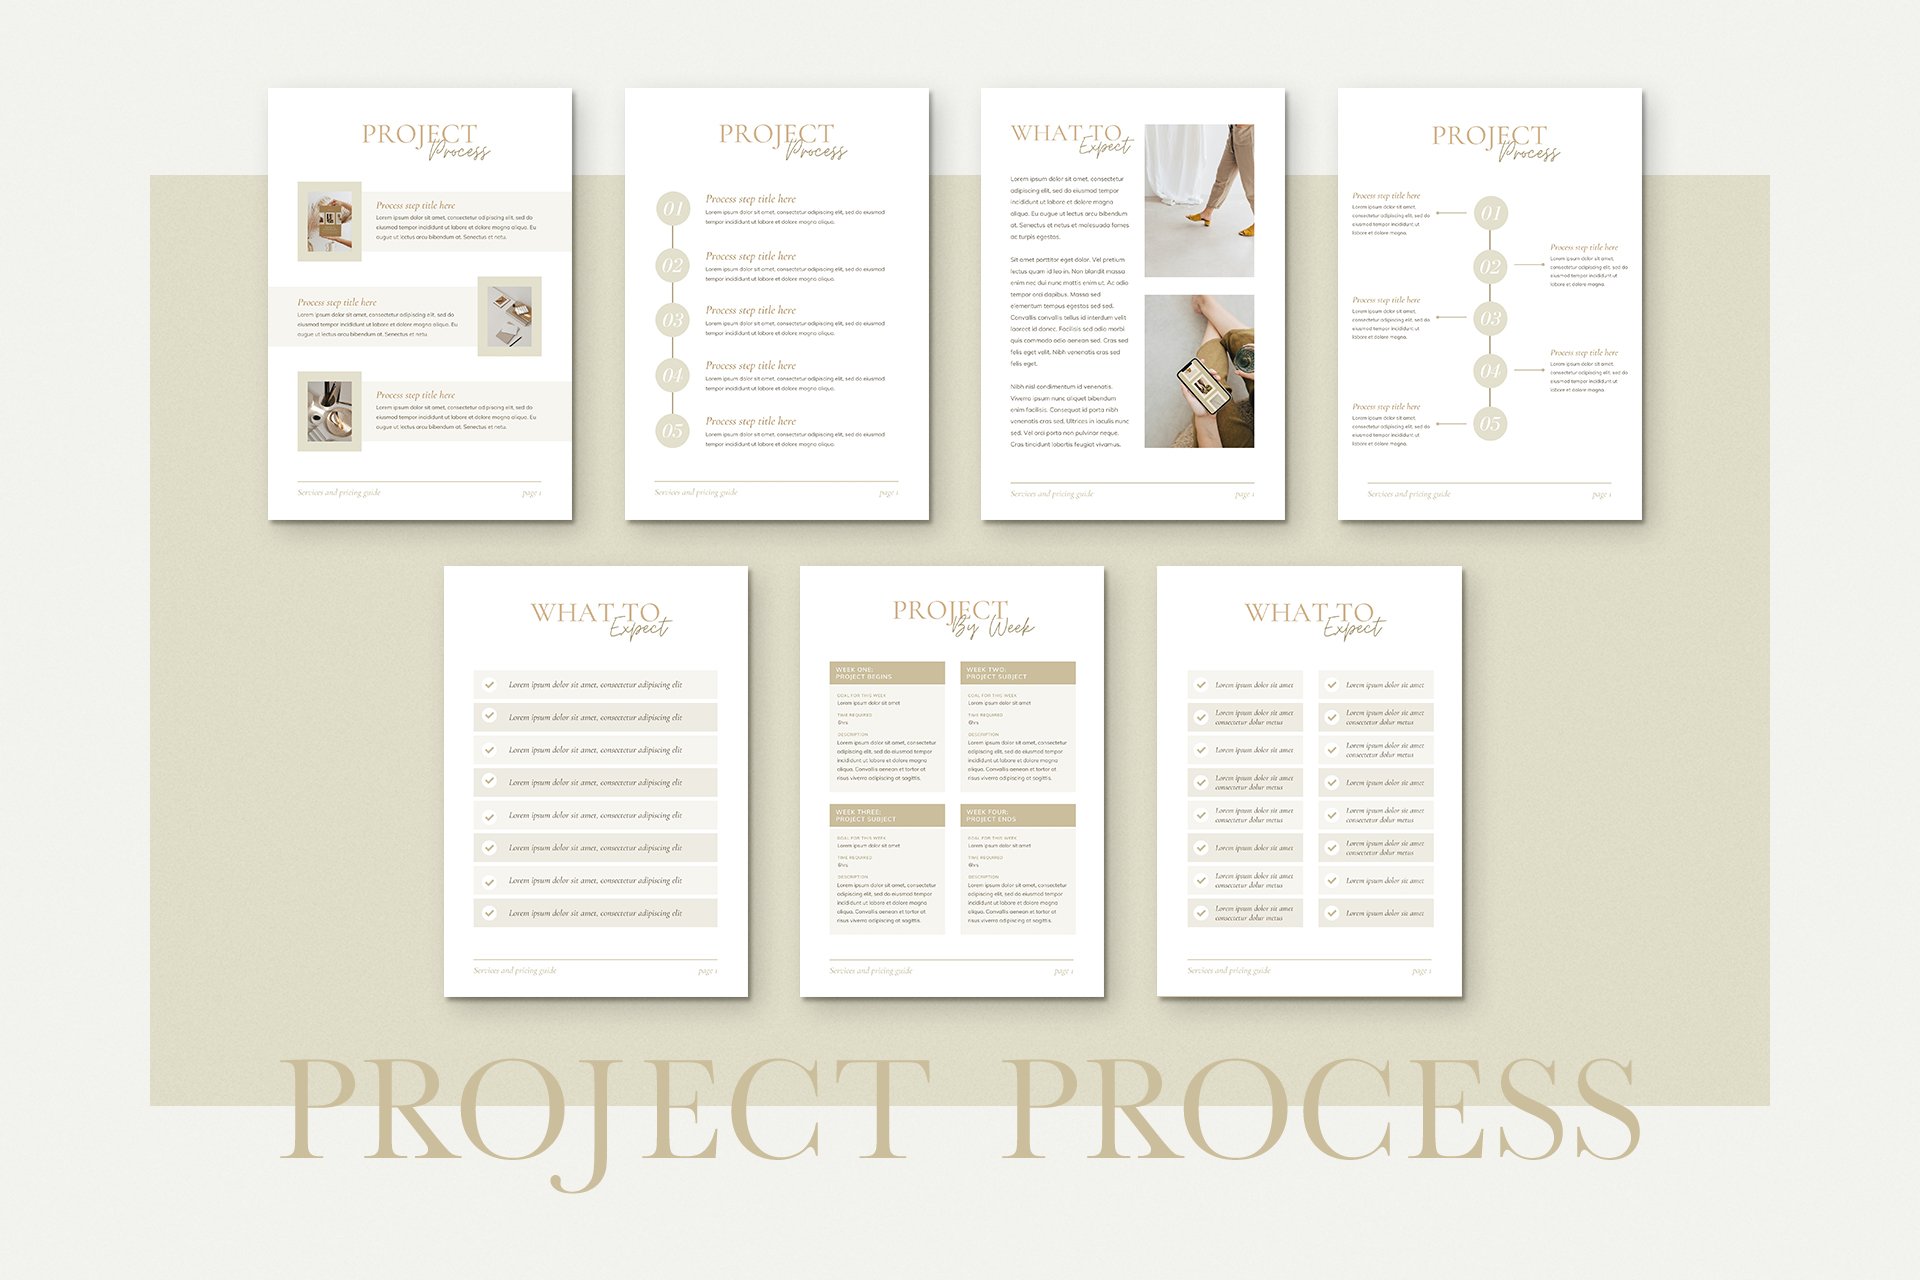 11 services pricing guide clinet proposal welcome packet workbook ebook template canva 202